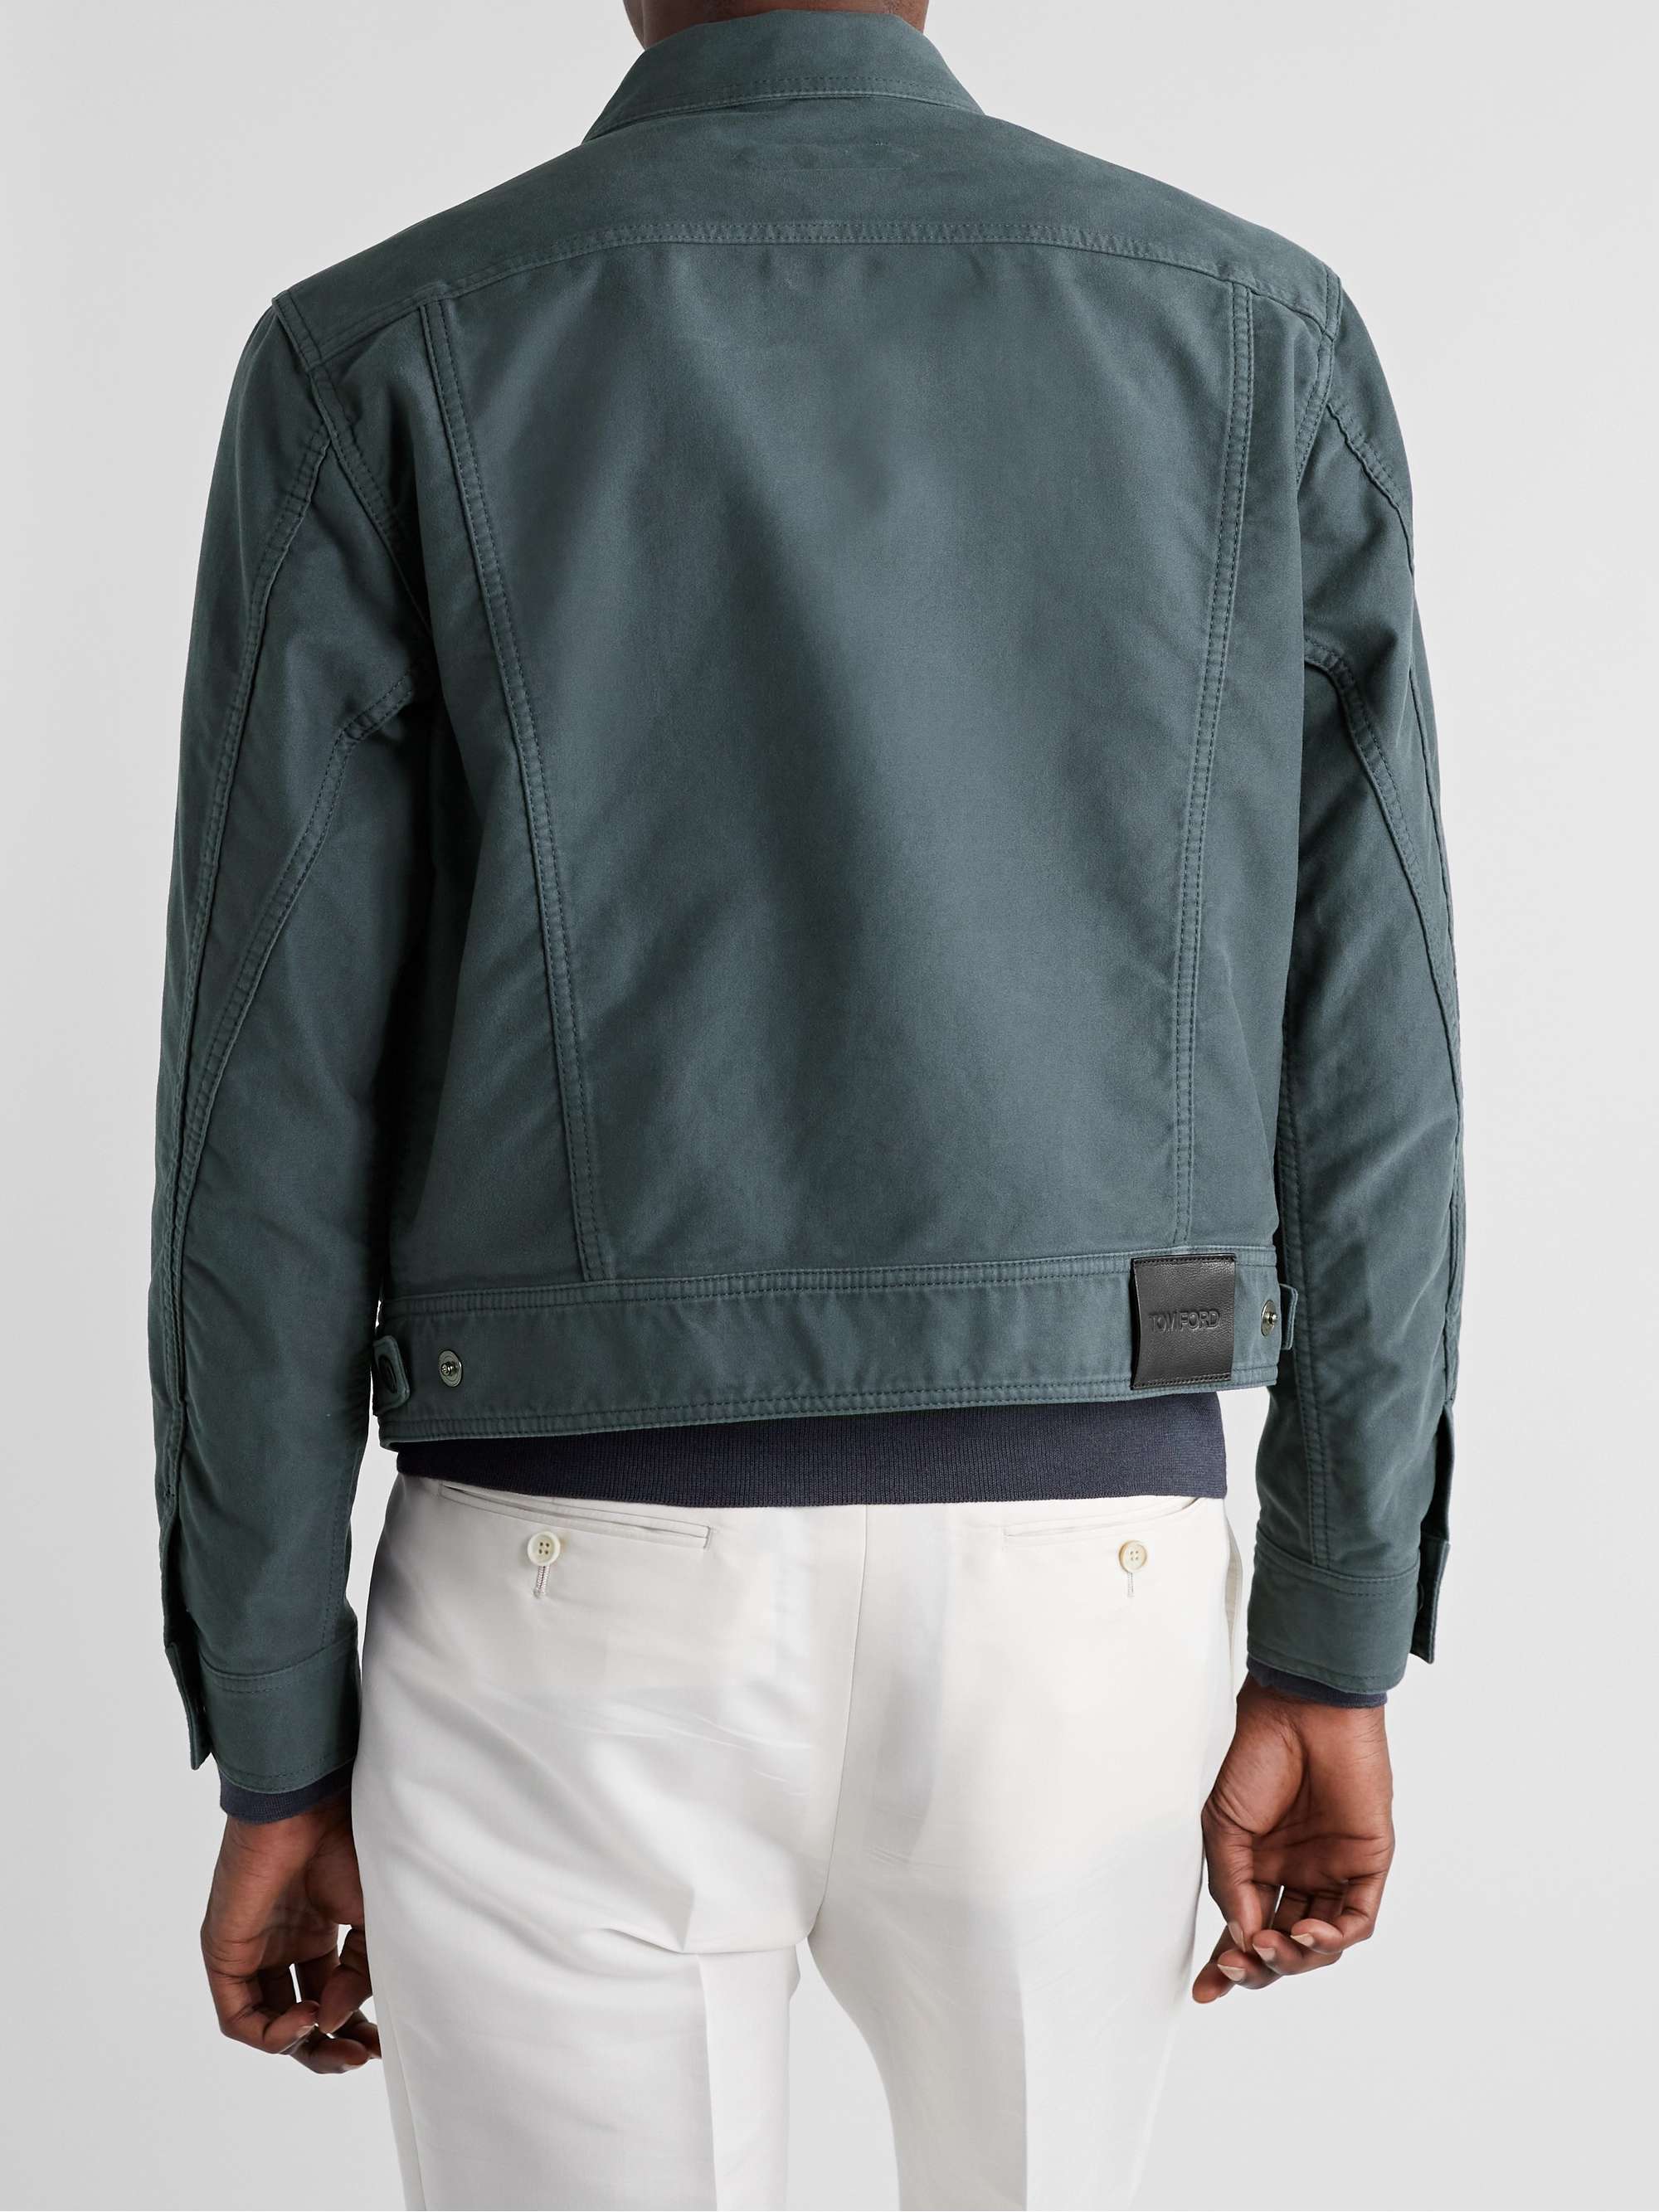 TOM FORD Washed Cotton-Twill Jacket